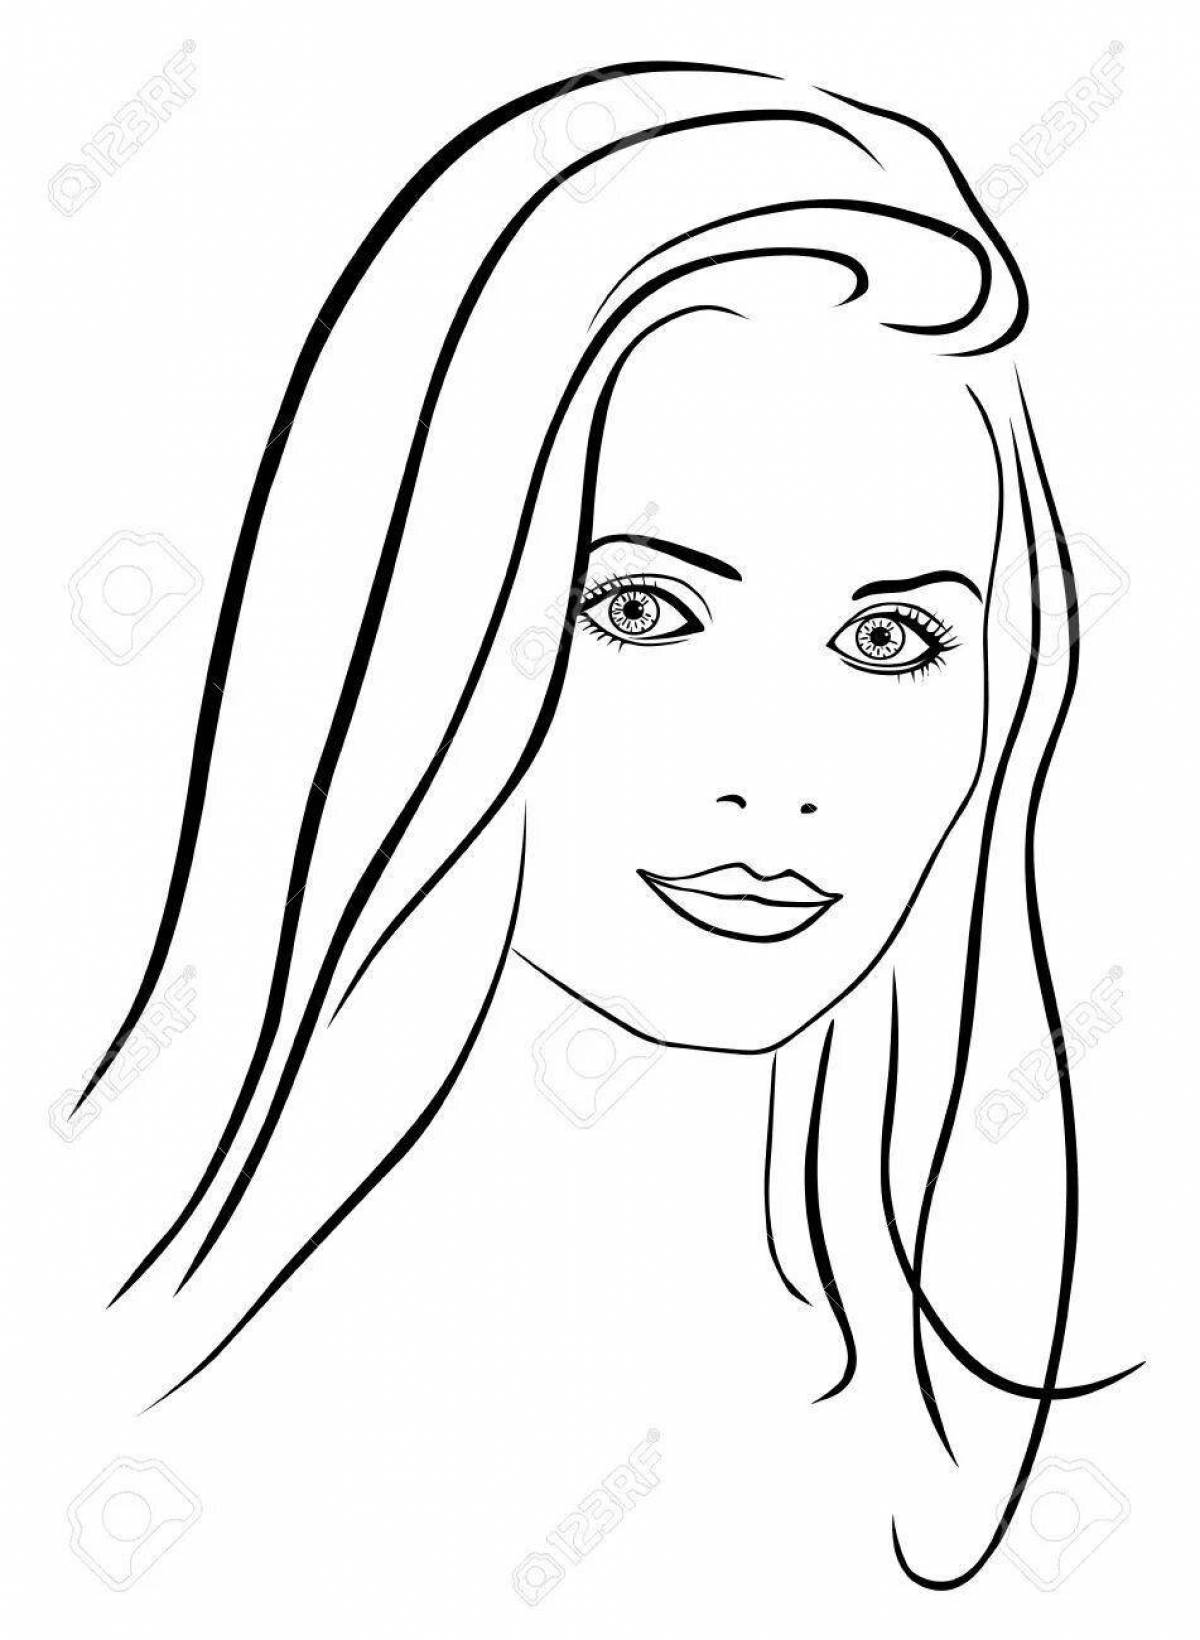 Playful female face coloring page for kids